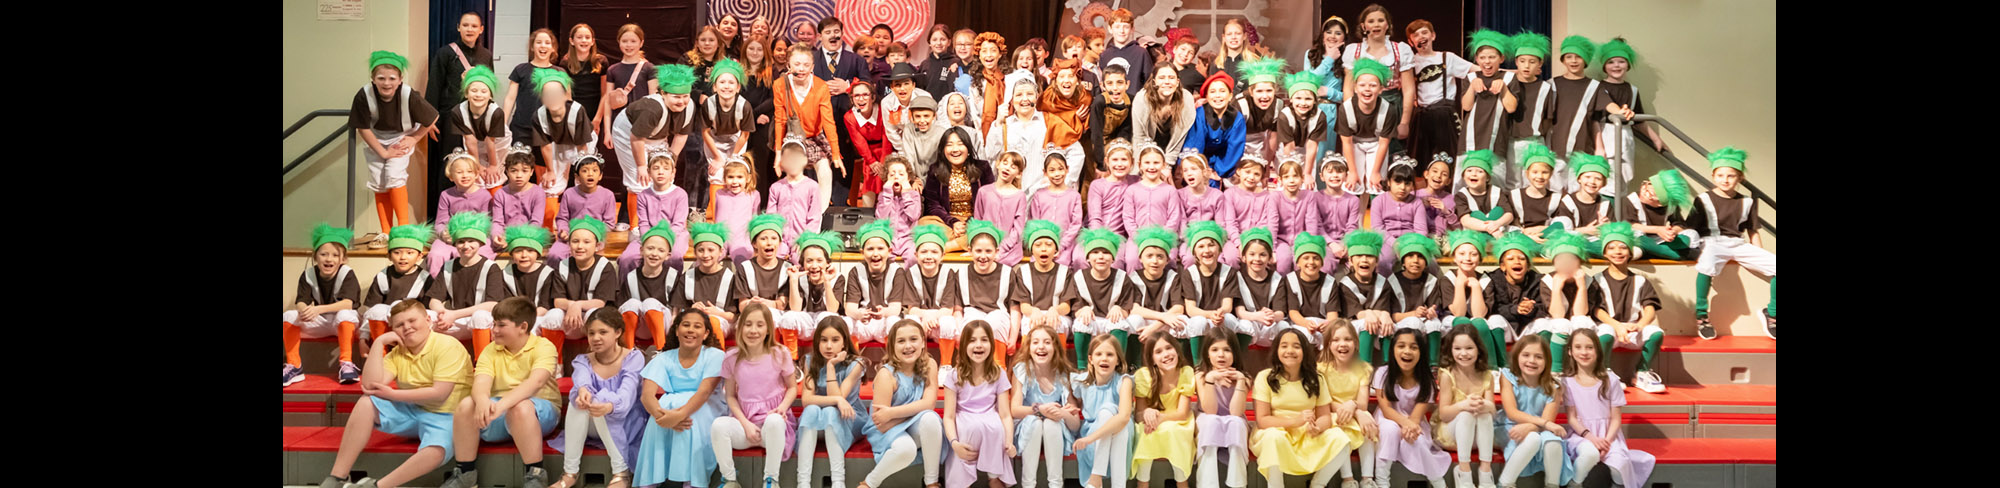 Cast of Willie Wonka on the stage